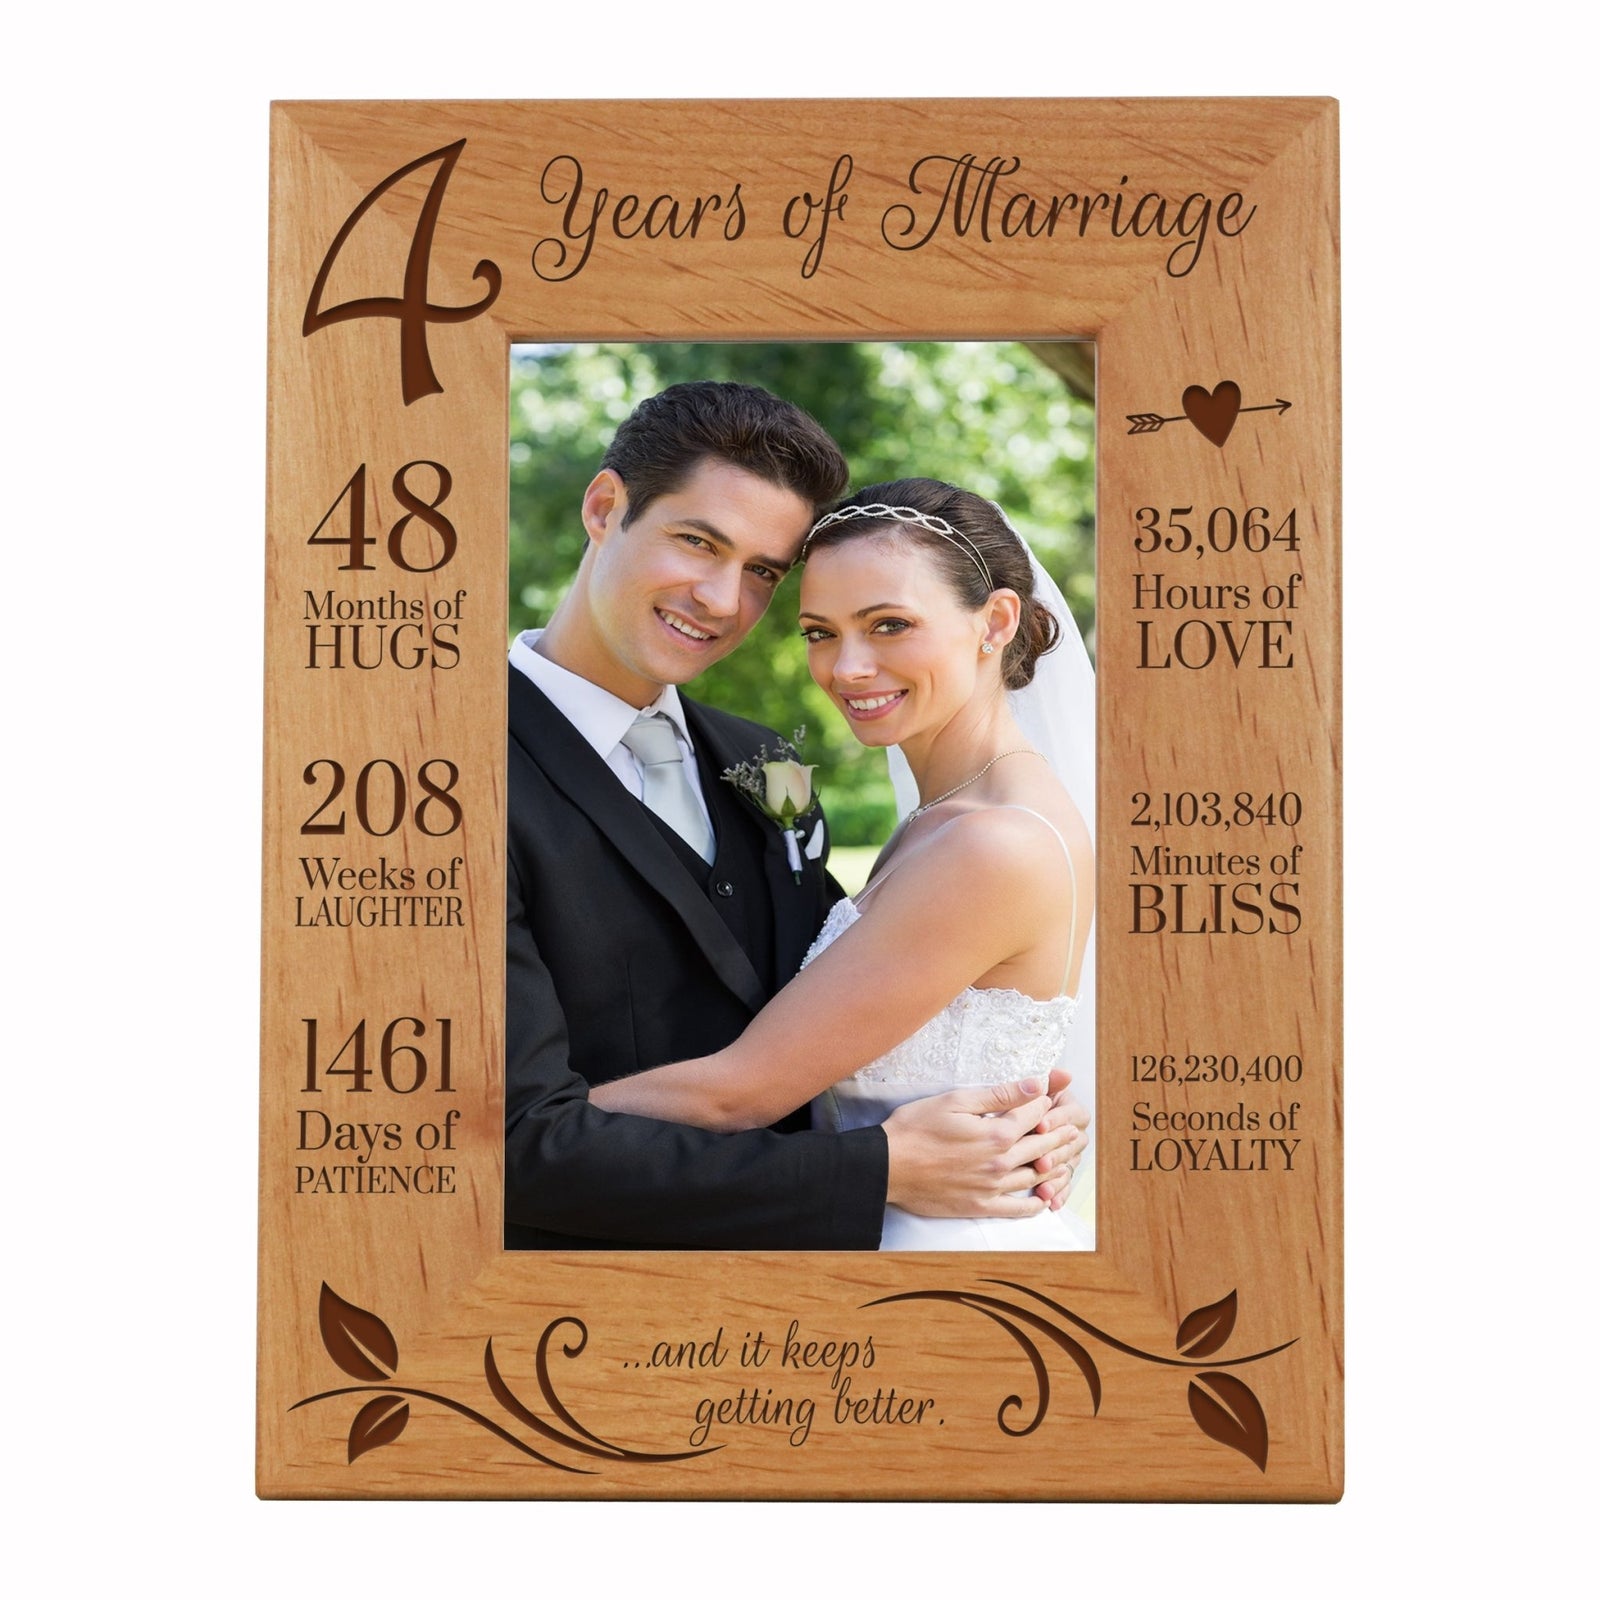 Lifesong Milestones Engraved 4th Anniversary Picture Frame Gift for Couples